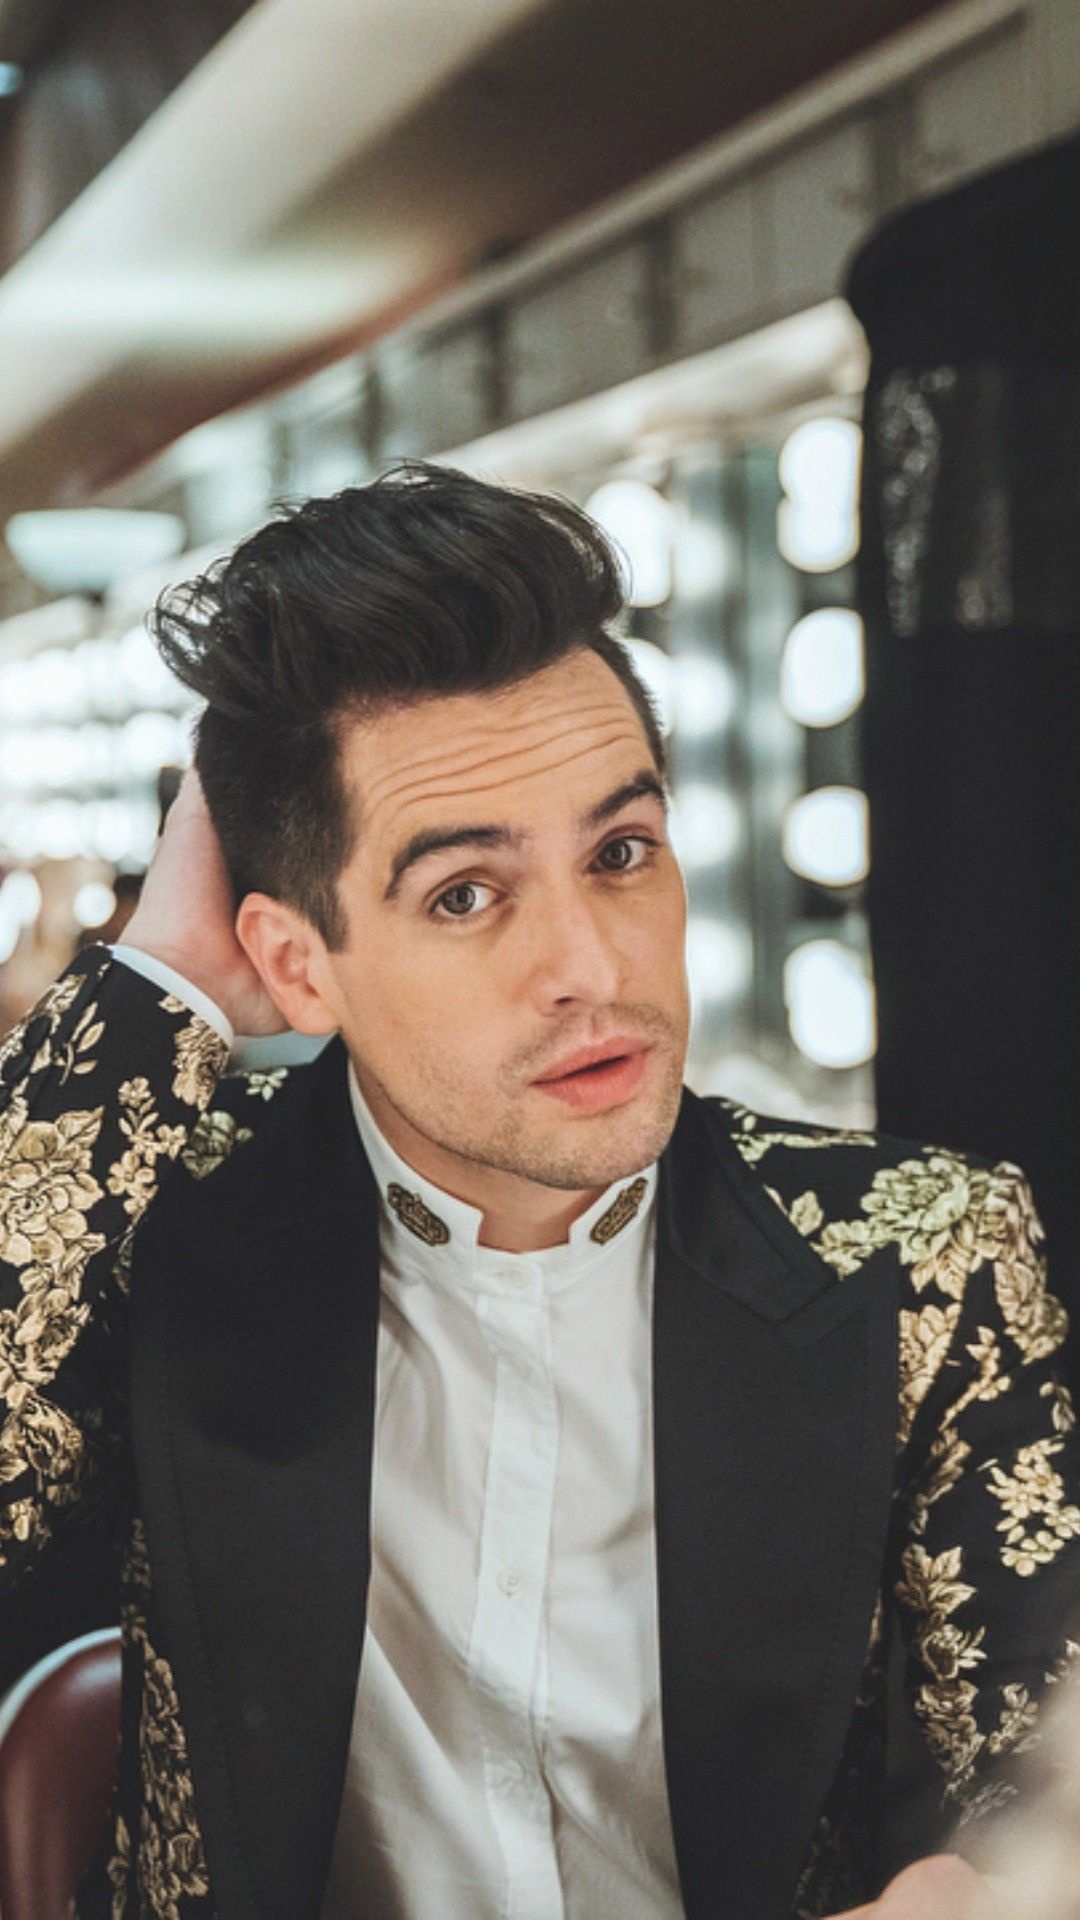 Brendon Urie: A legendary American singer-songwriter, Third album Vices and Virtues. 1080x1920 Full HD Wallpaper.